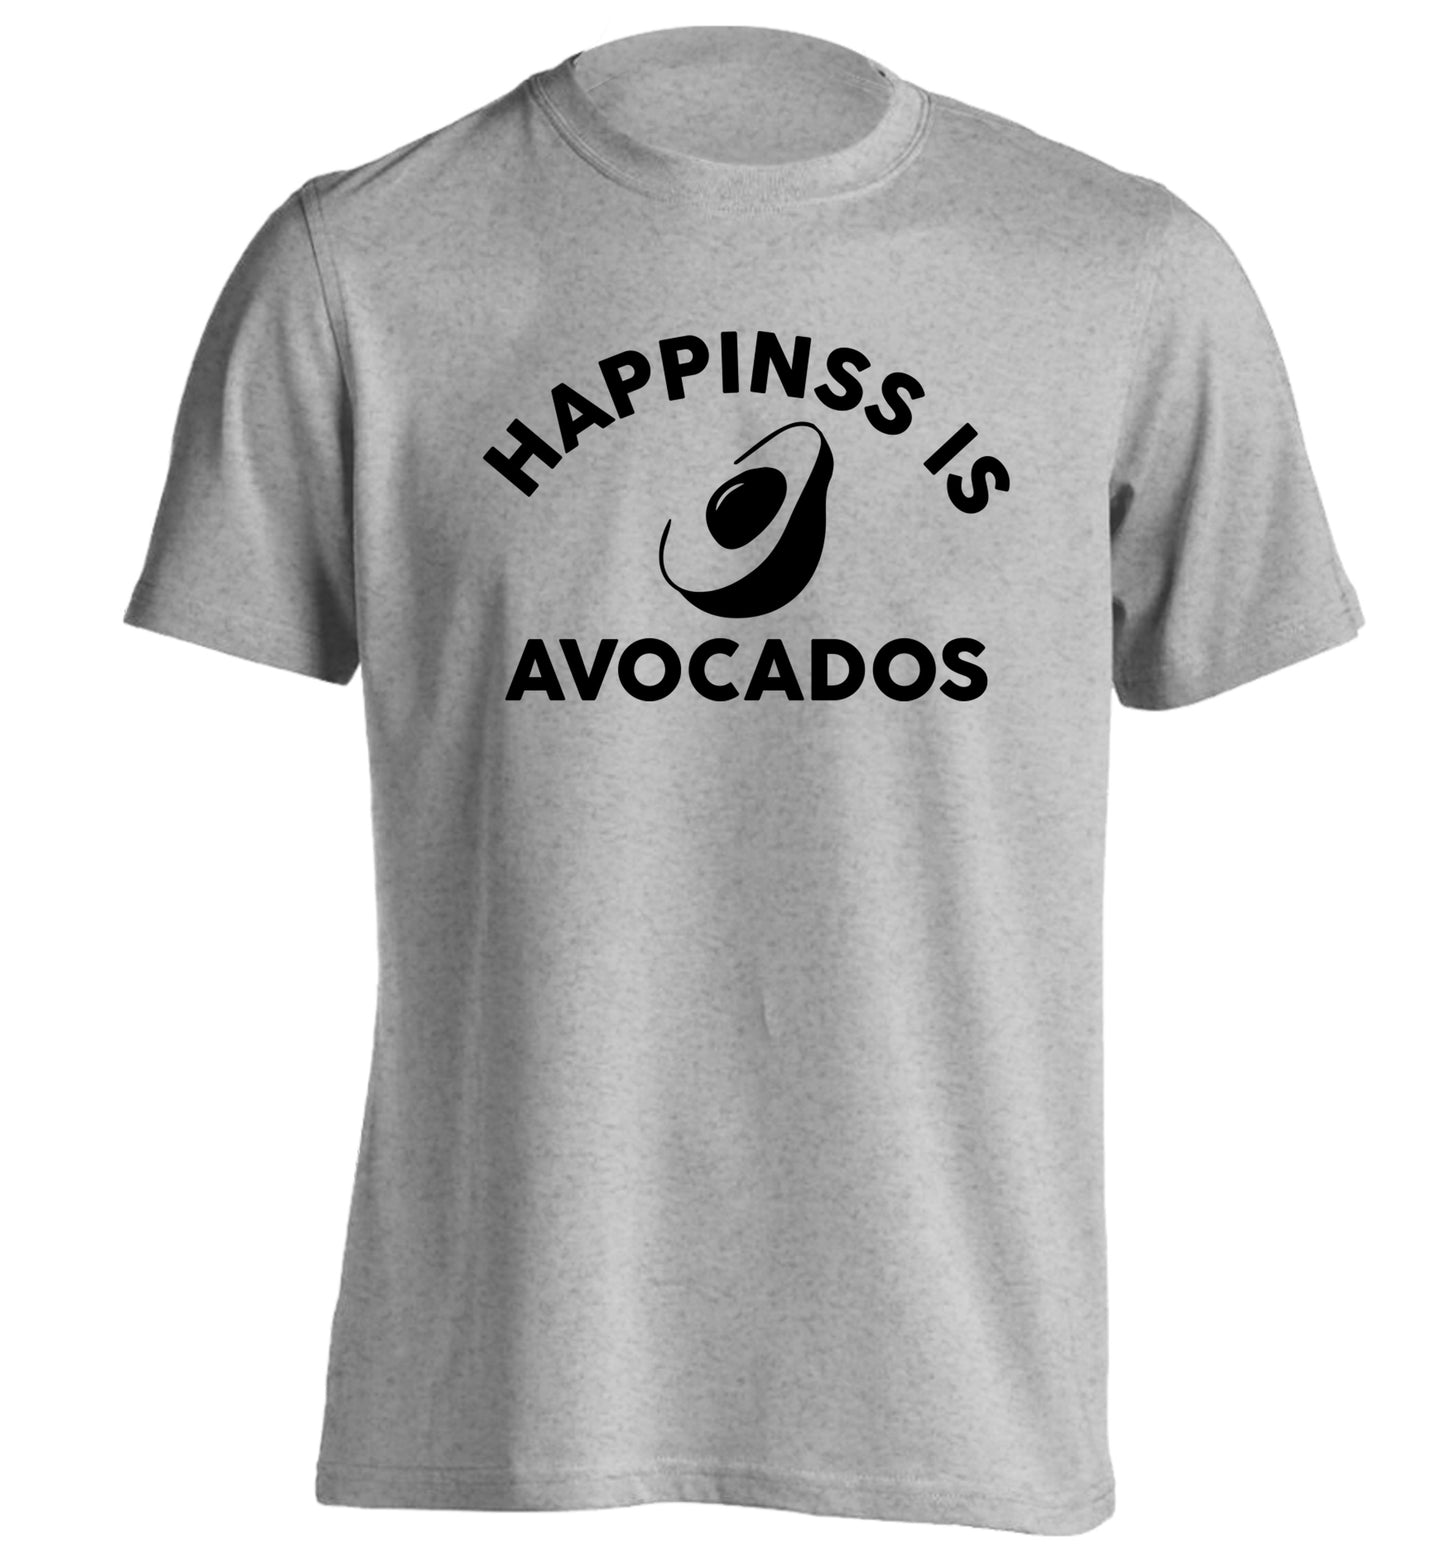 Happiness is avocados adults unisex grey Tshirt 2XL